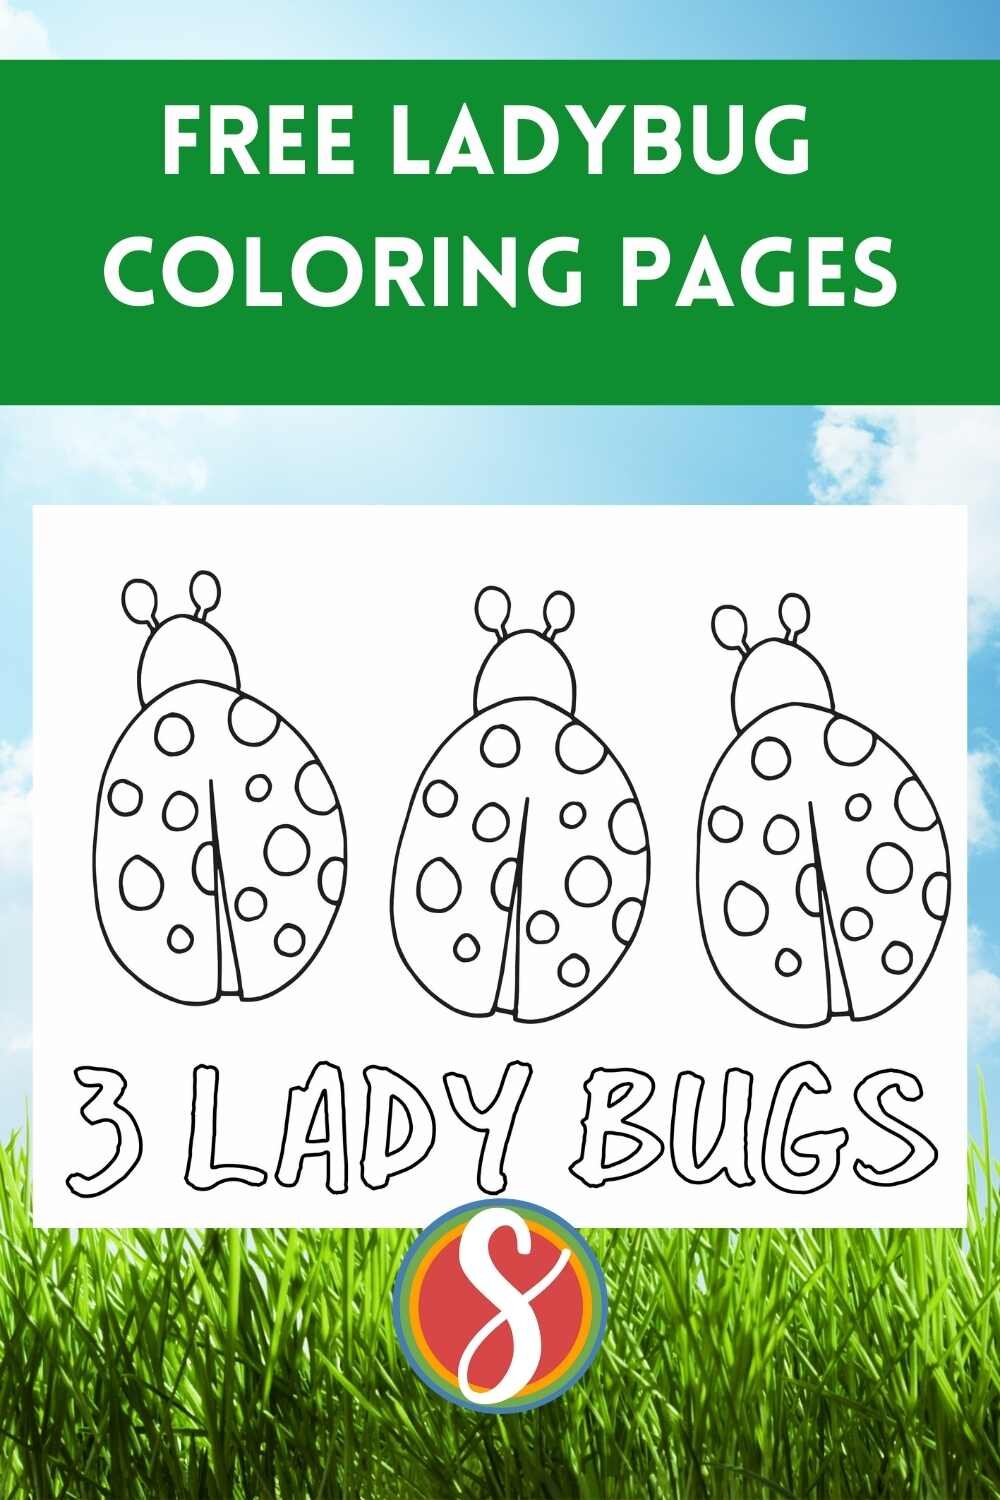 3 ladybugs a free printable coloring page